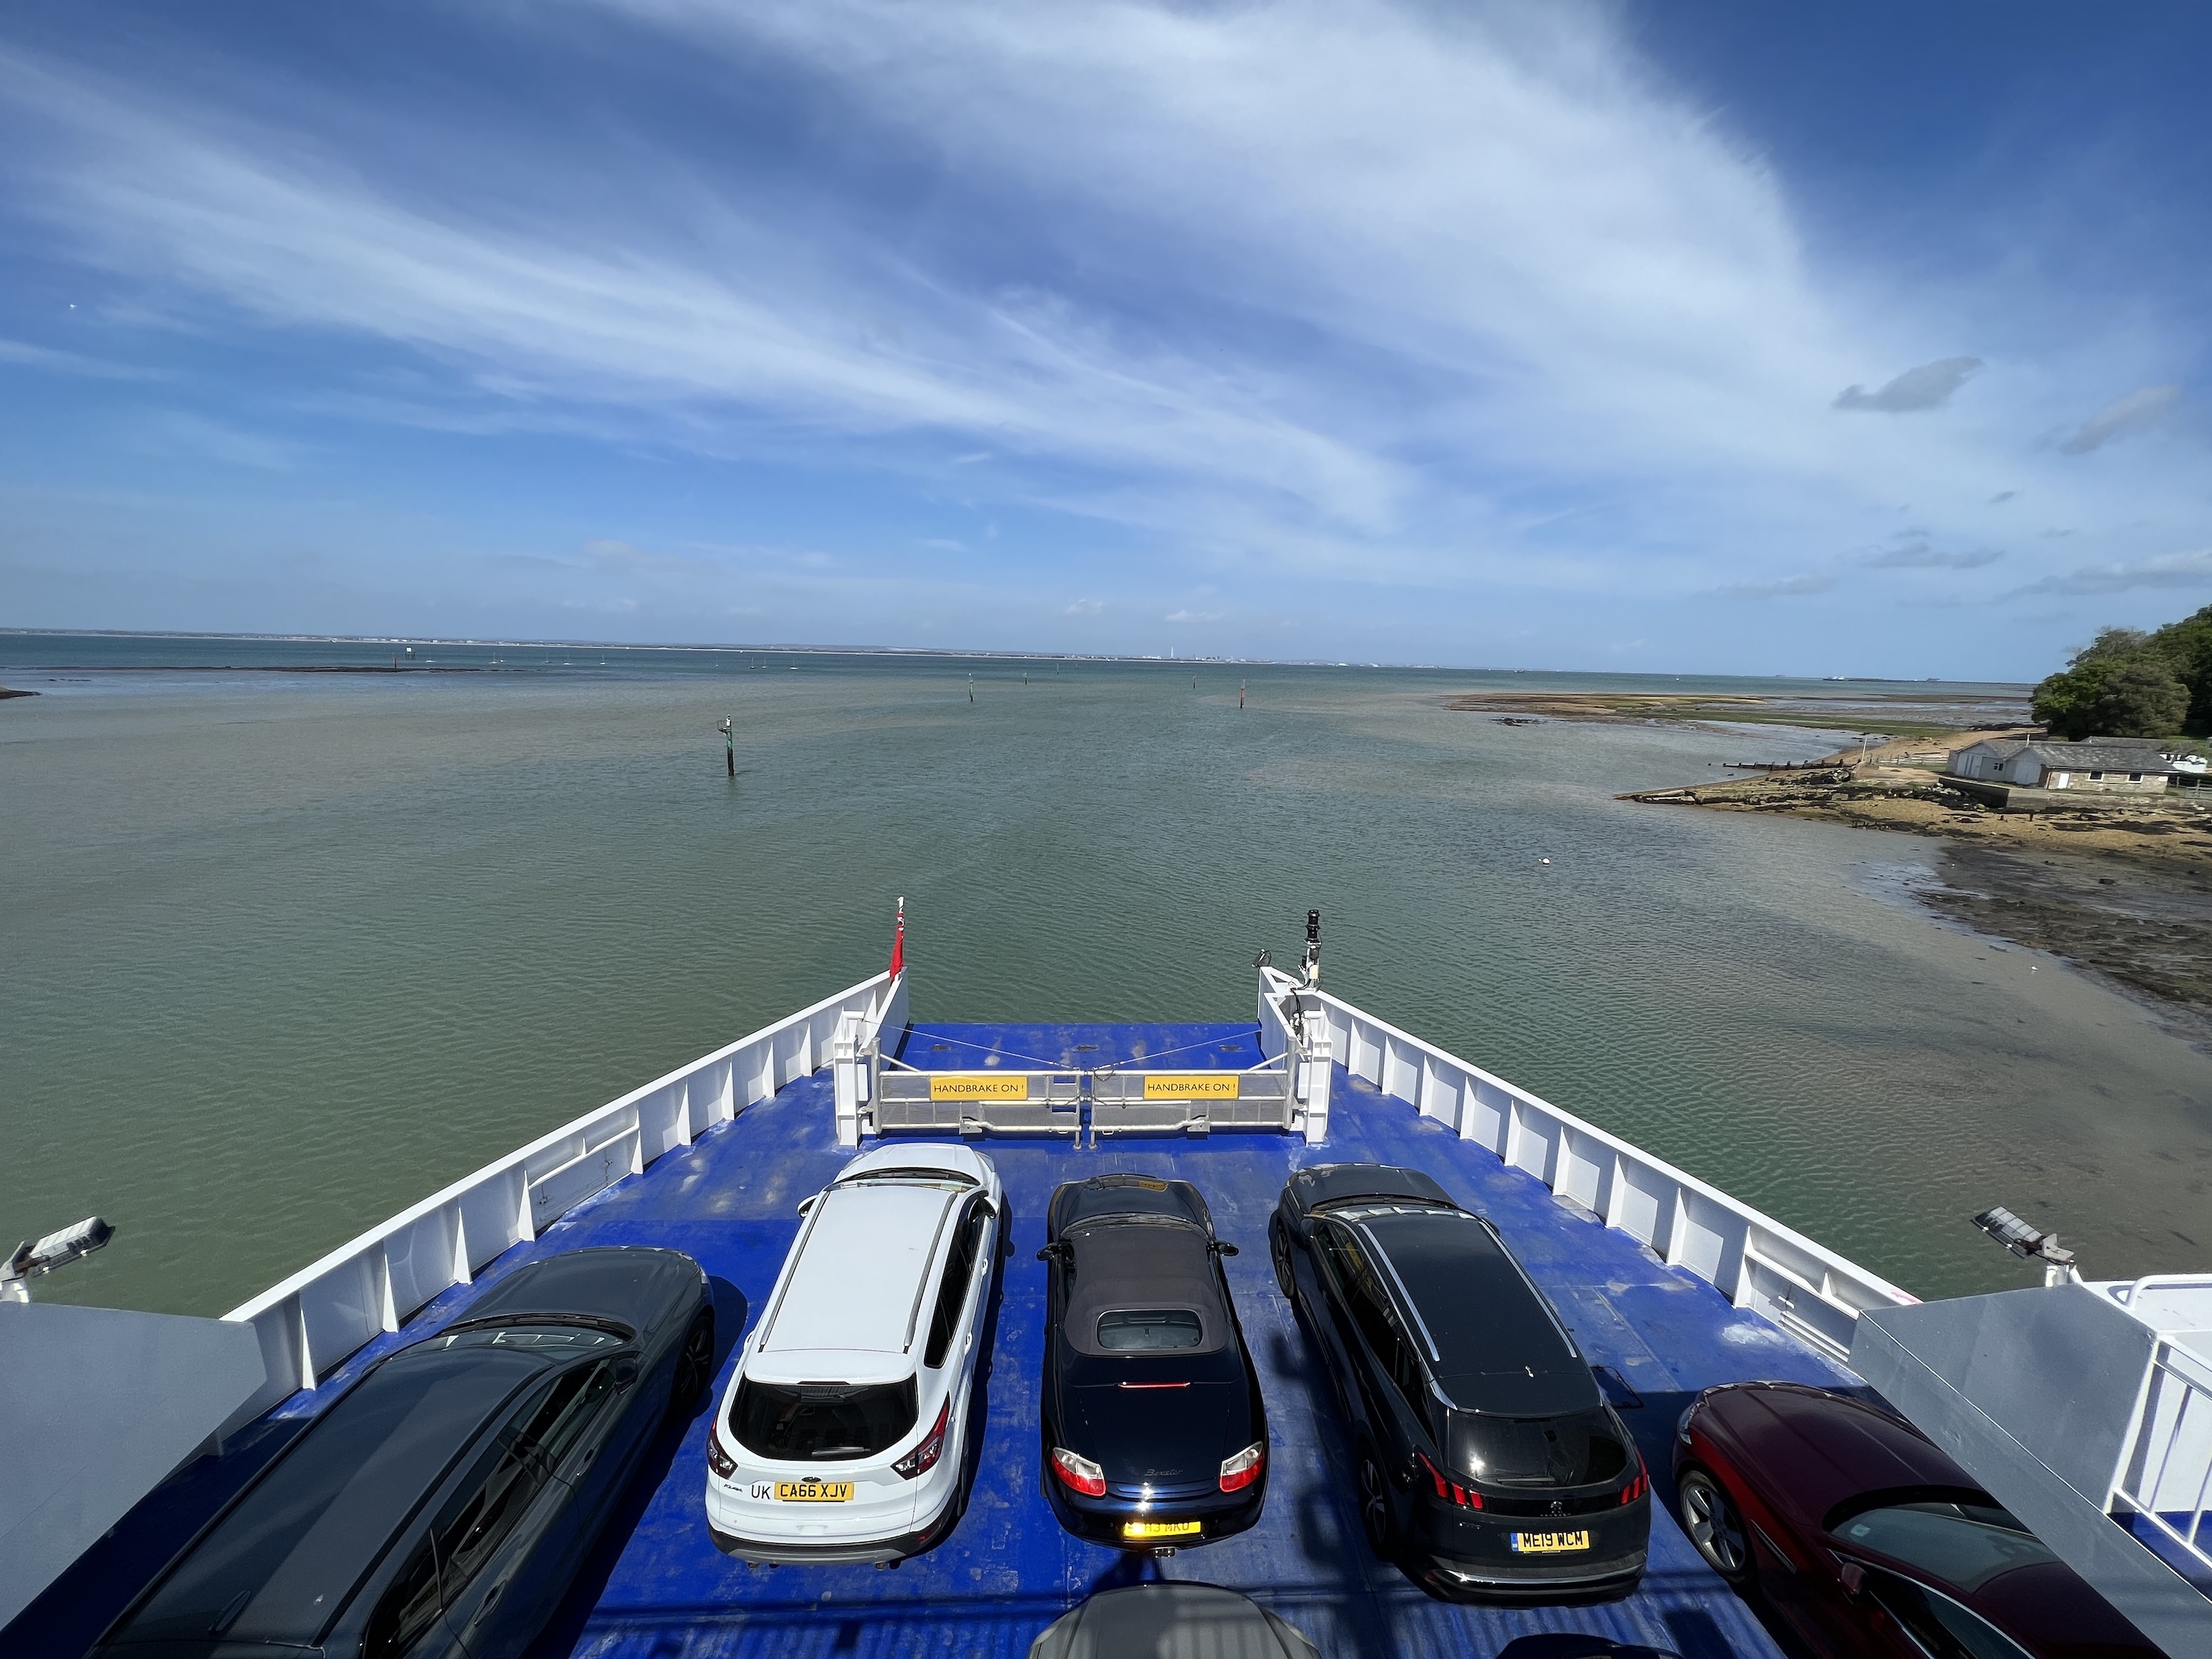 iPhone 13 Pro photo of a car ferry using the wide-angle camera.